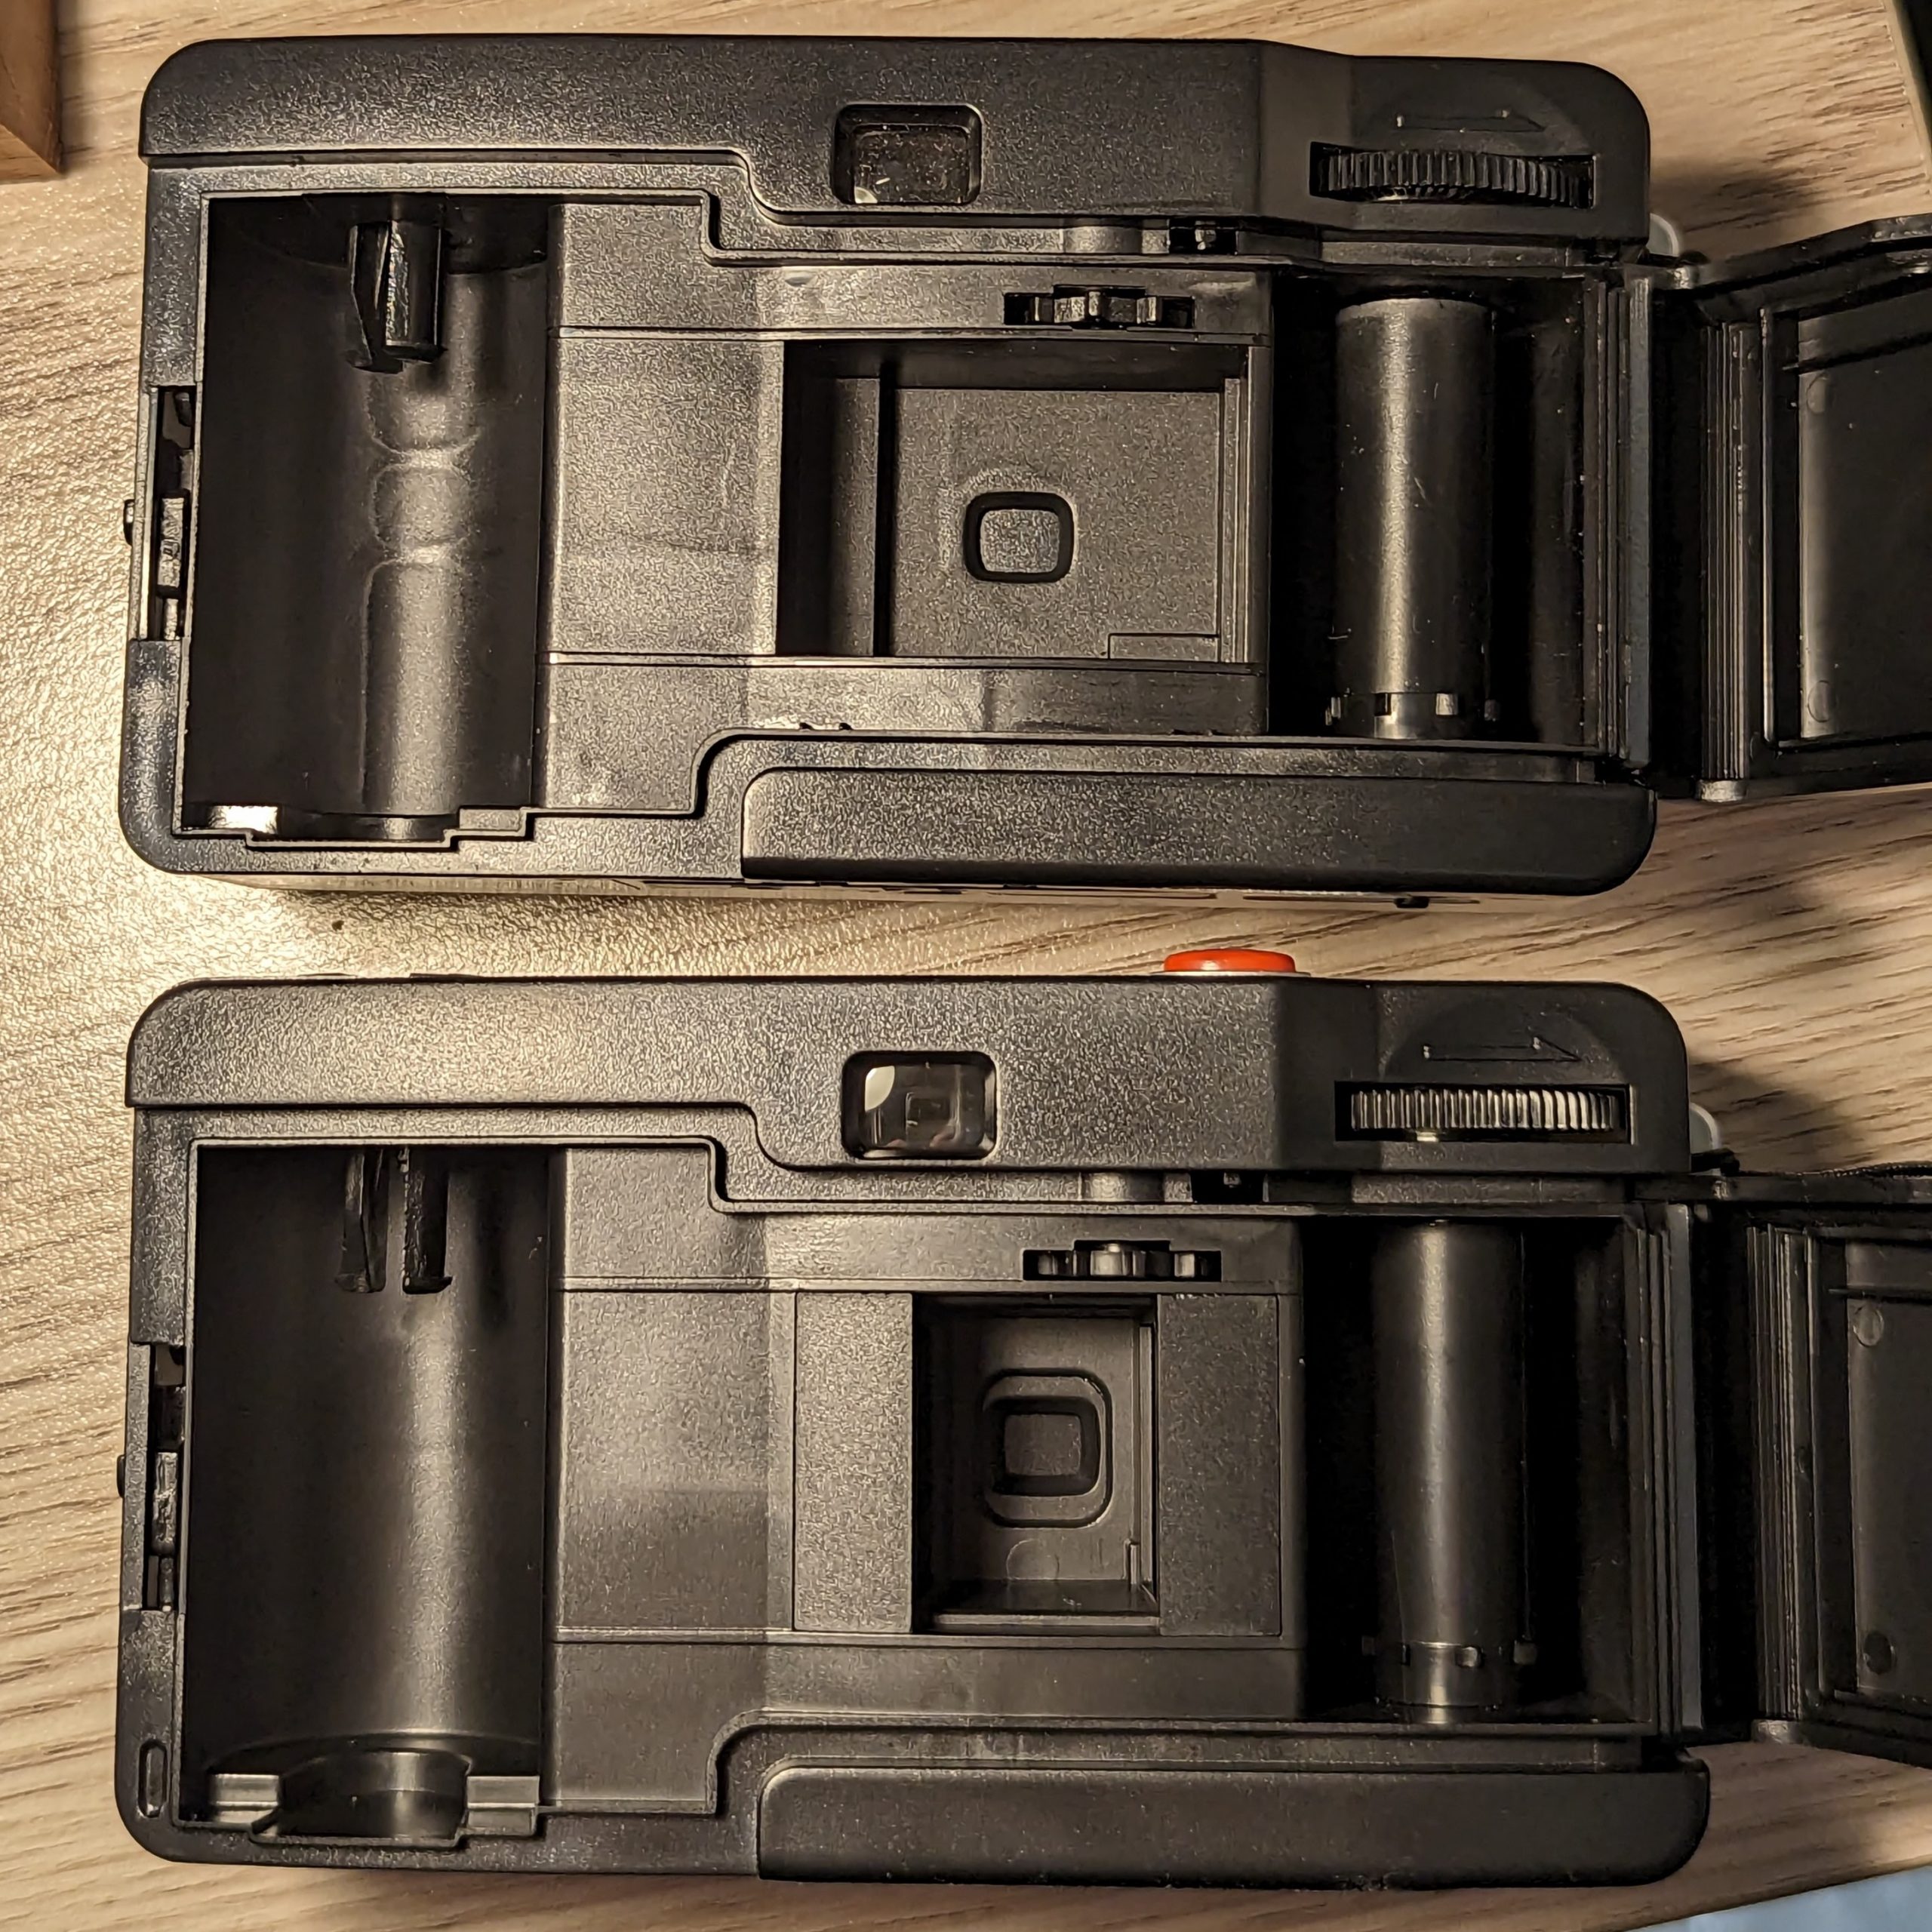 Inside the Agfaphoto full (top) and half frame (bottom)